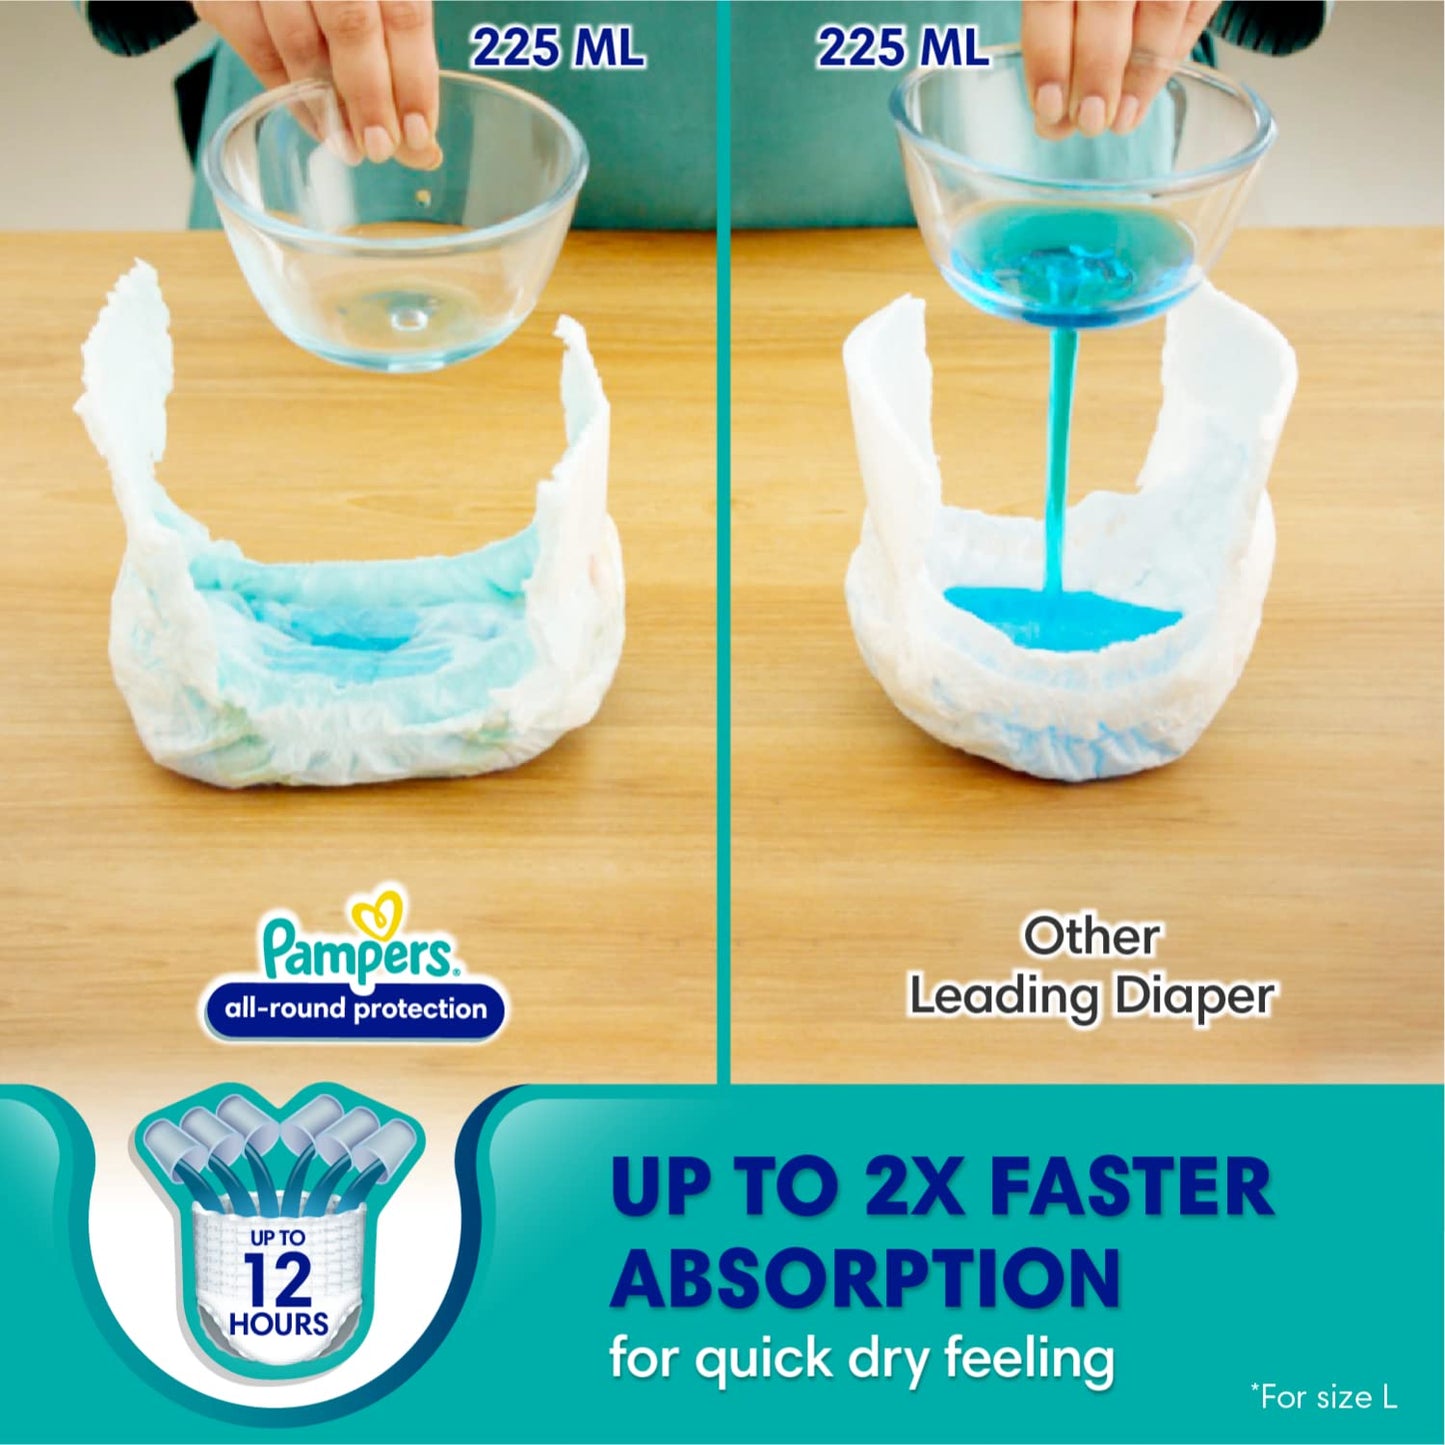 Pampers Diaper Pants - New Born - (86 Pieces)